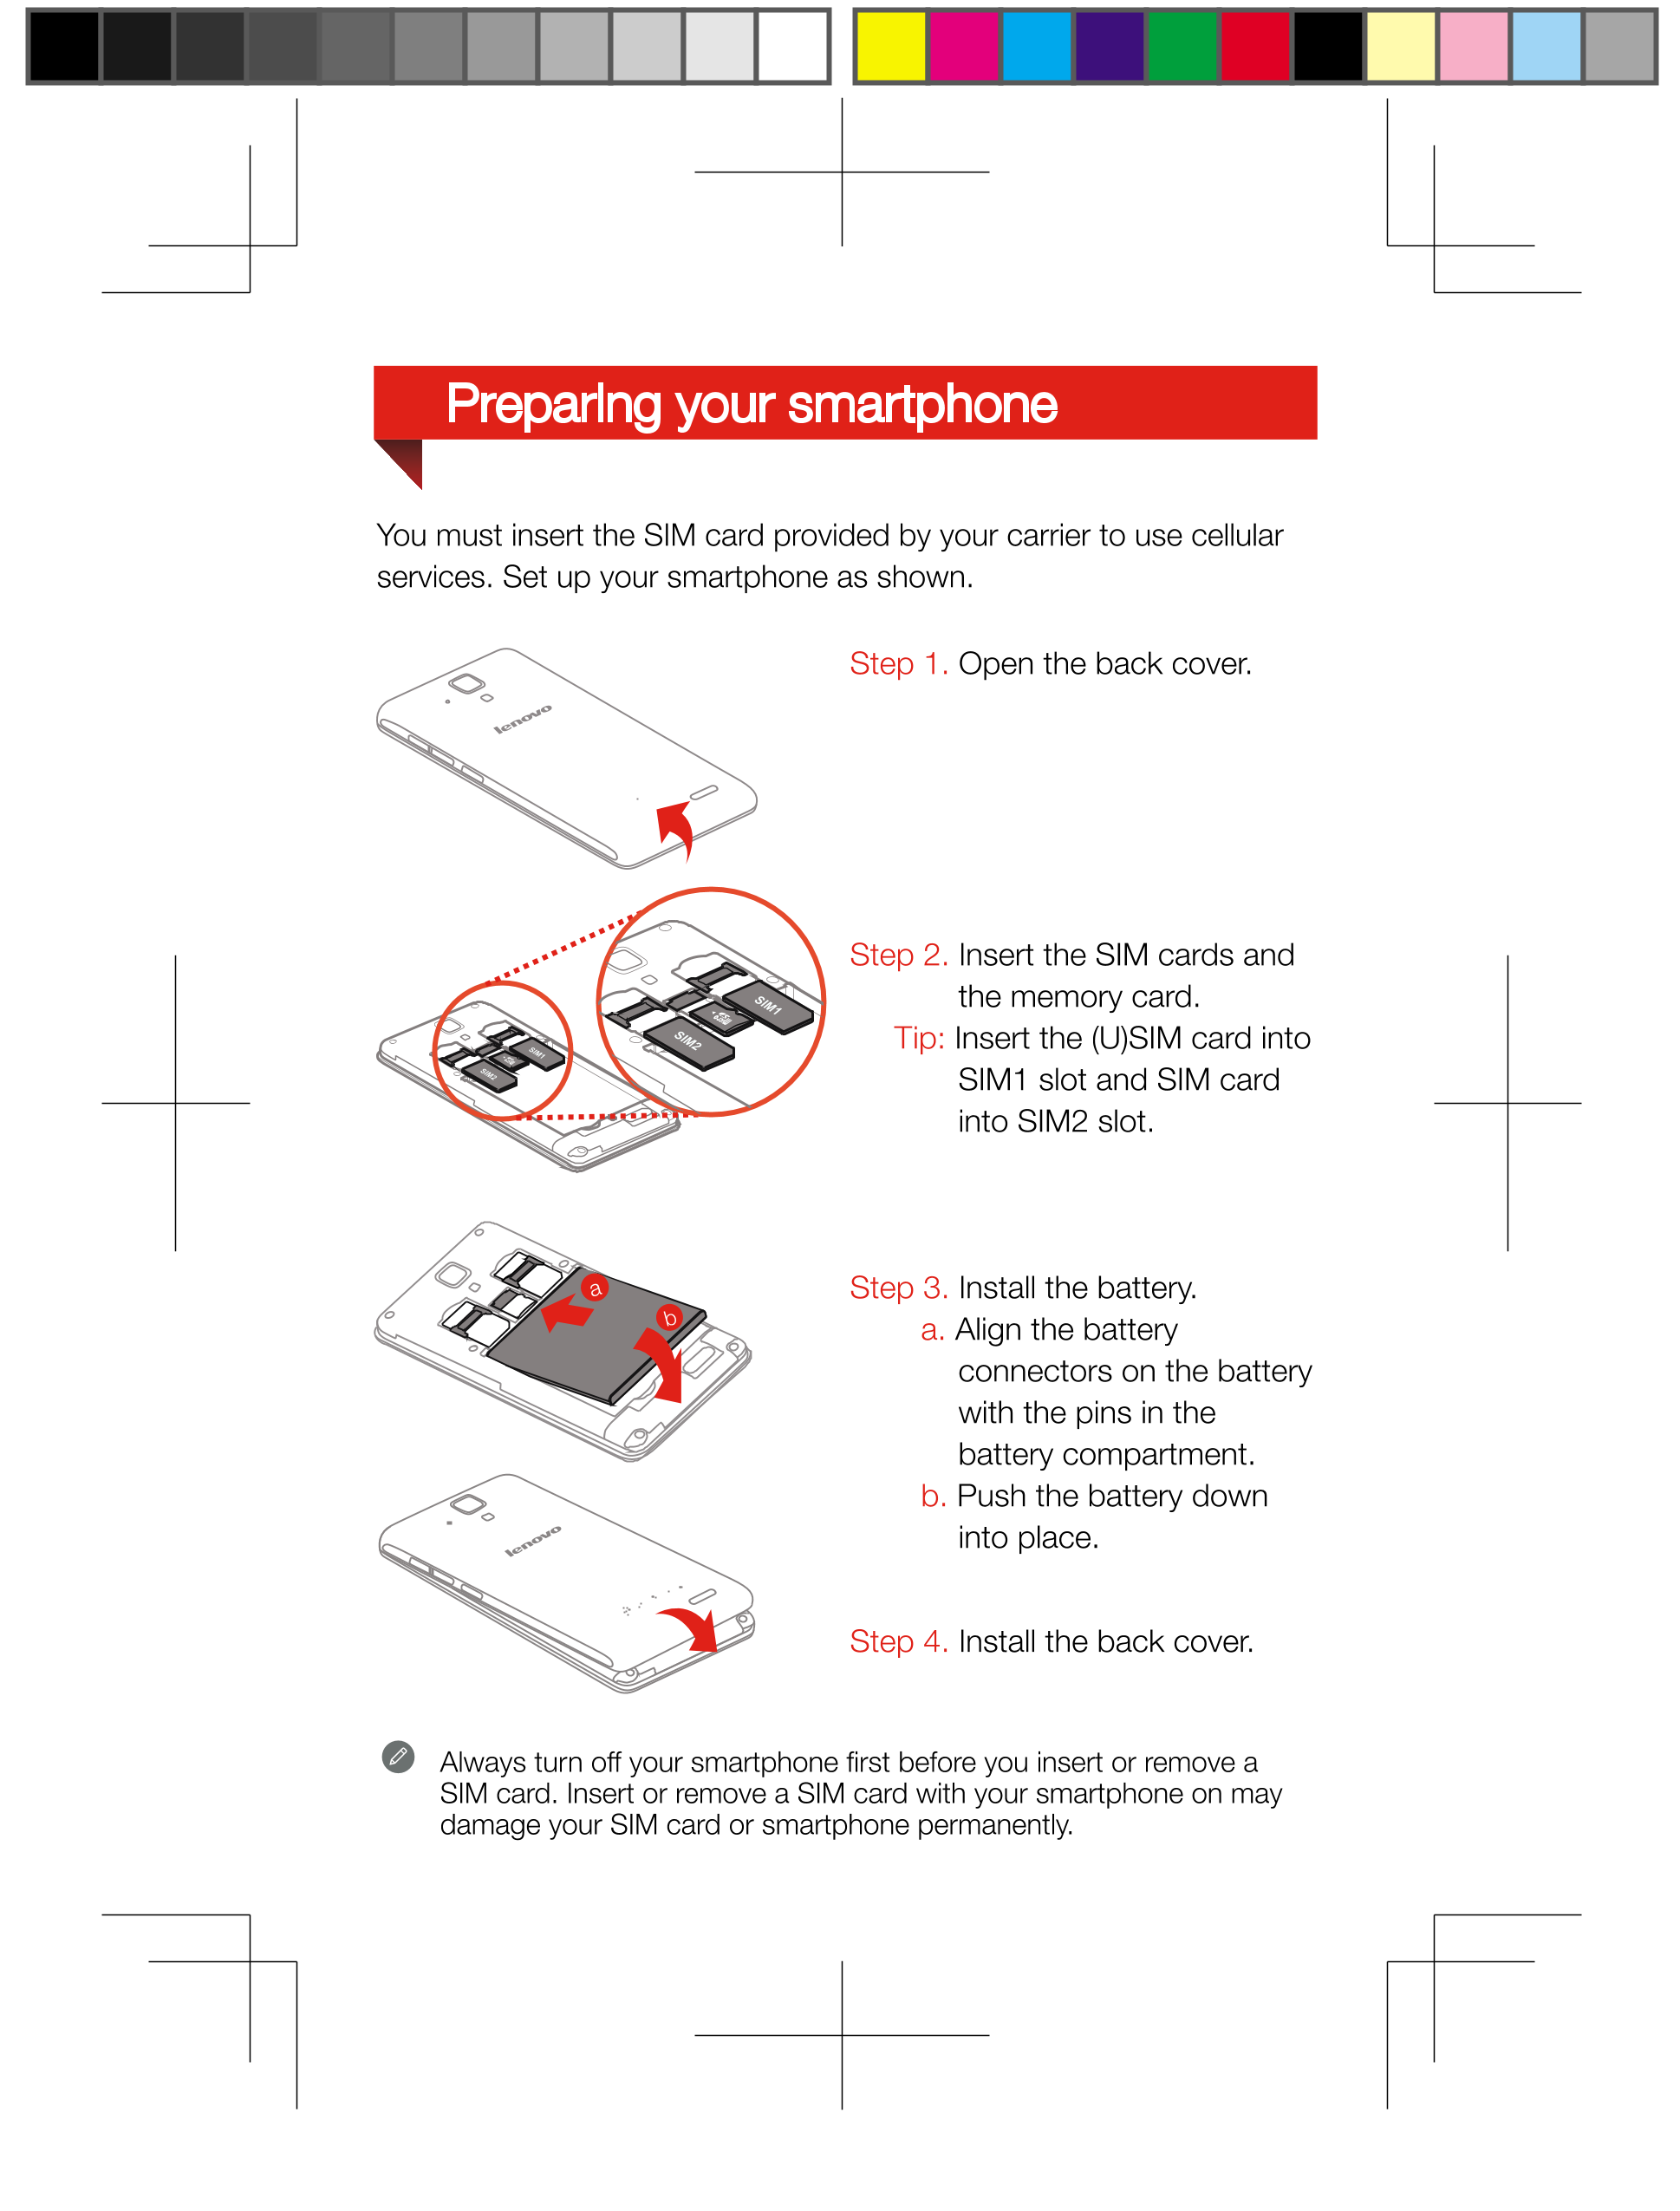 Preparing your smartphone
You must insert the SIM card provided by your carrier to use cellular
services. Set up your smartphone